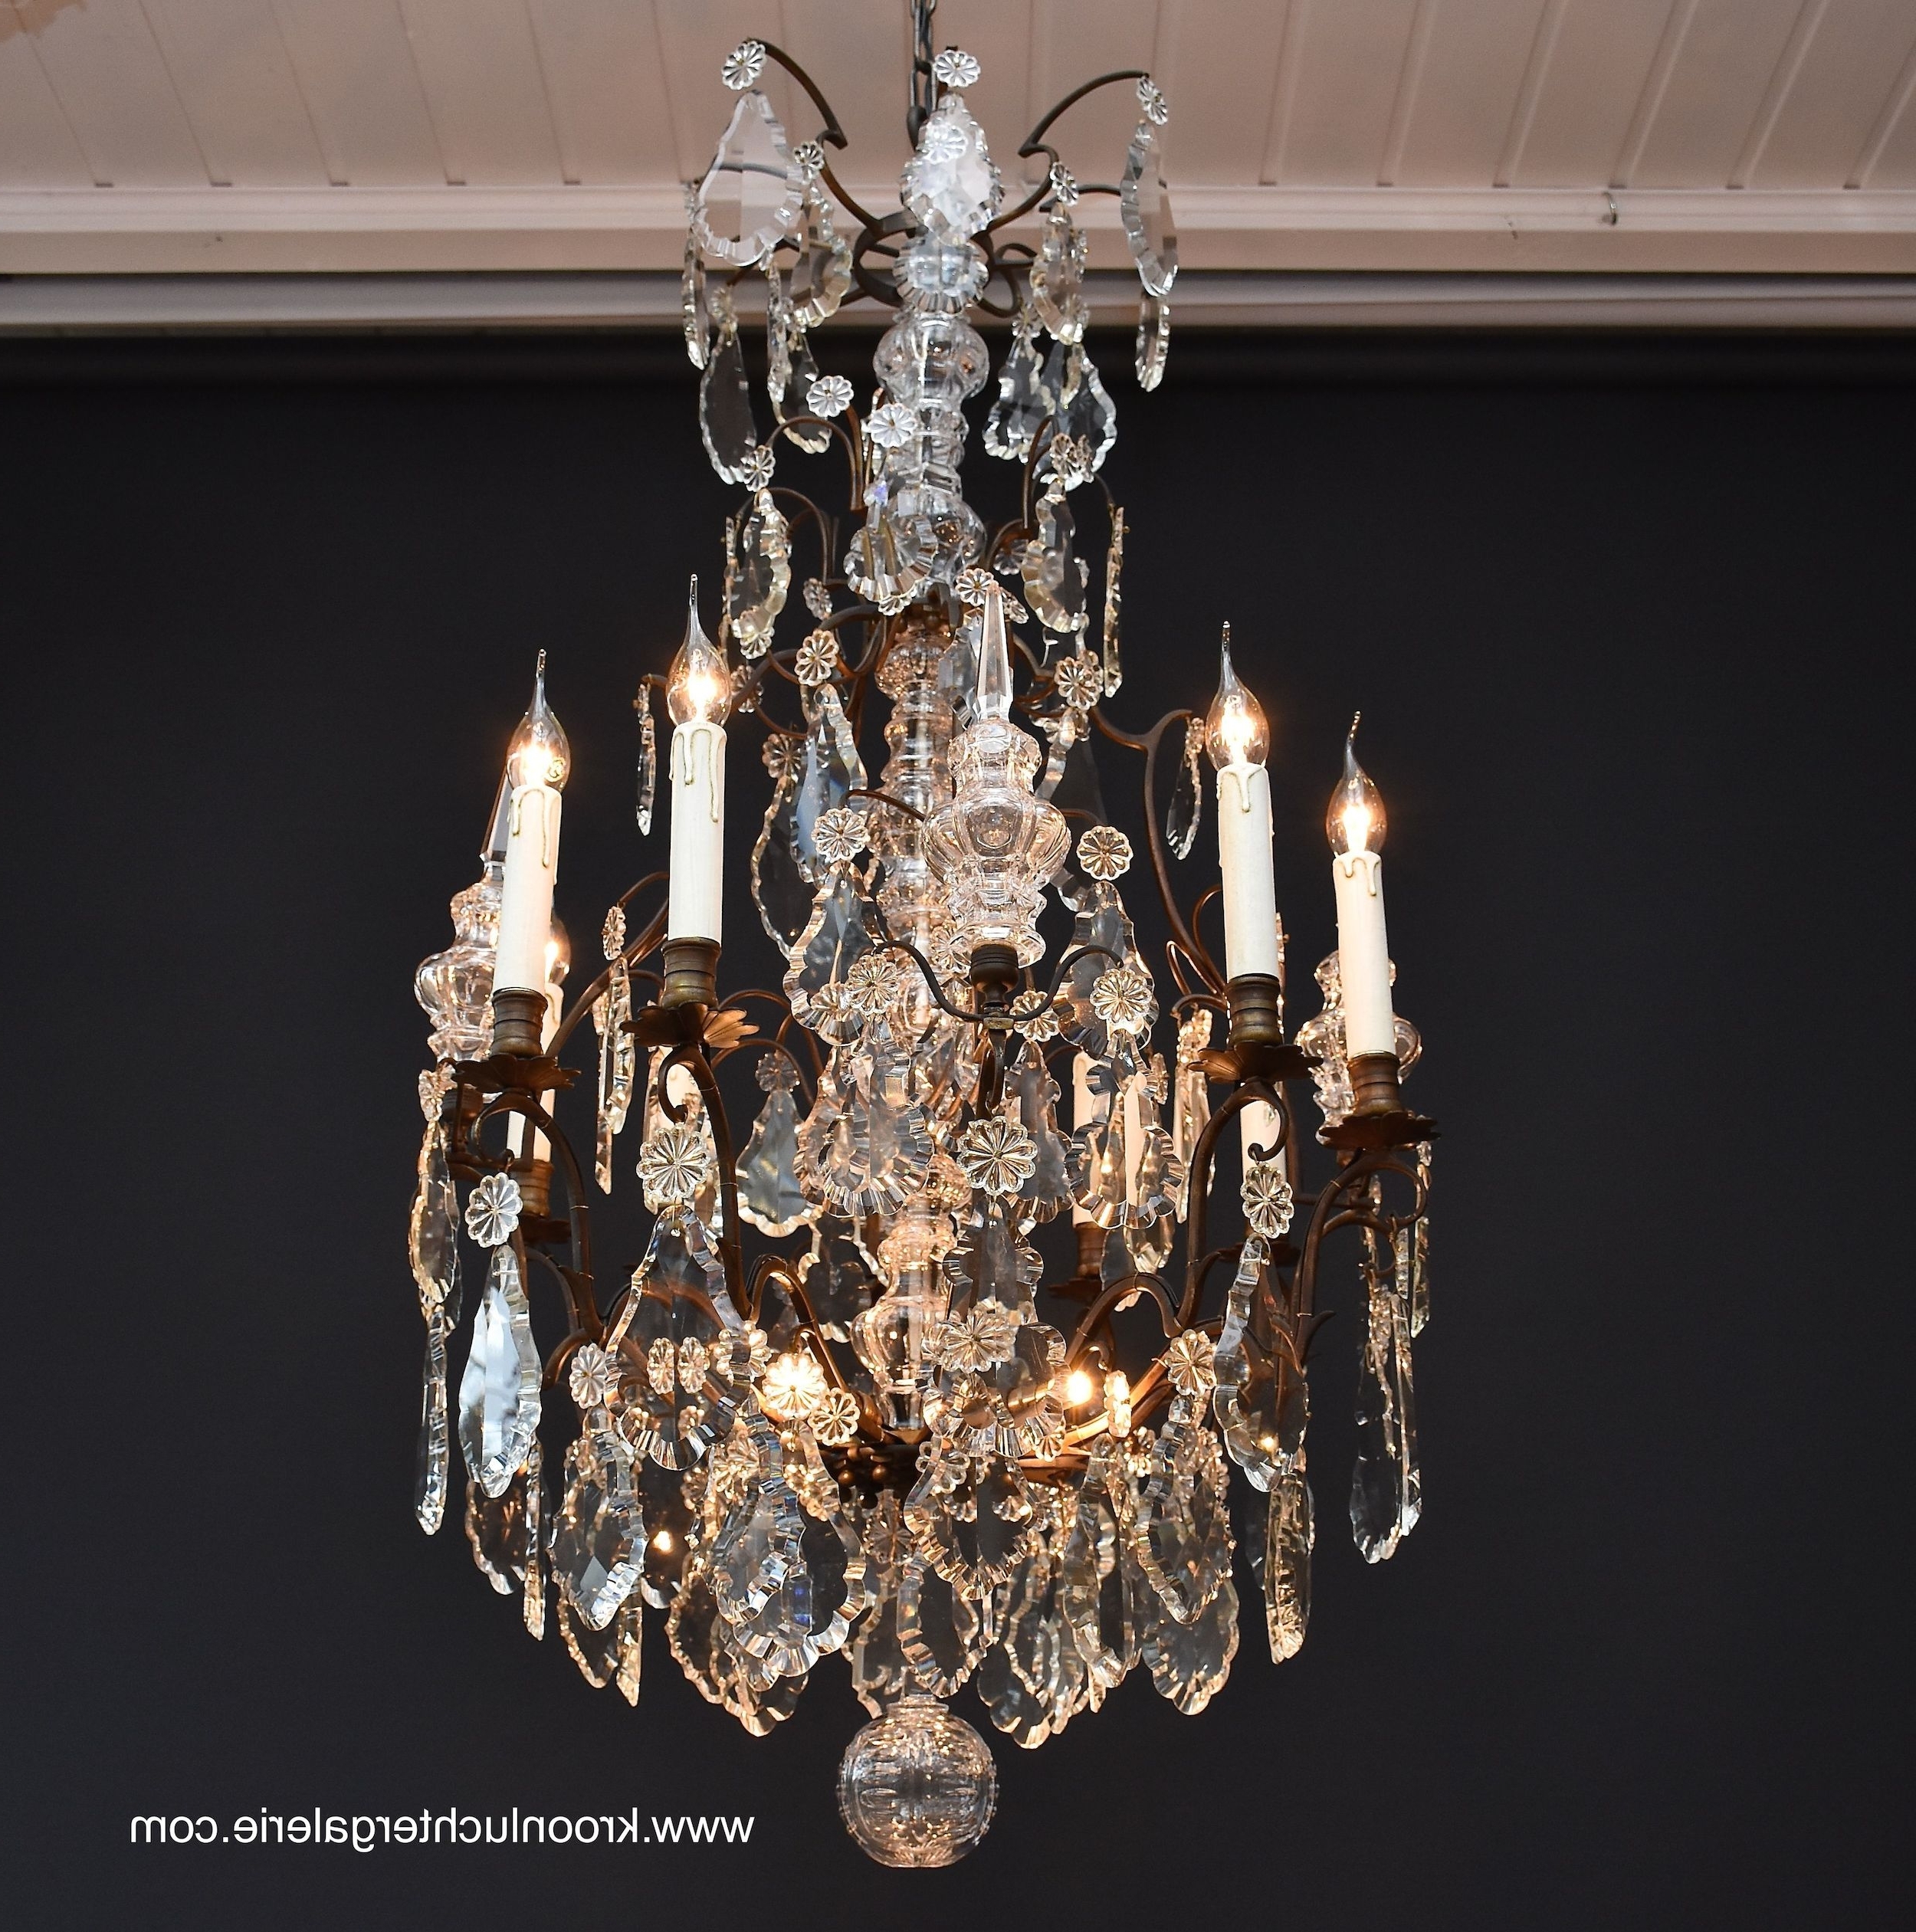 Selected photo of French chandeliers